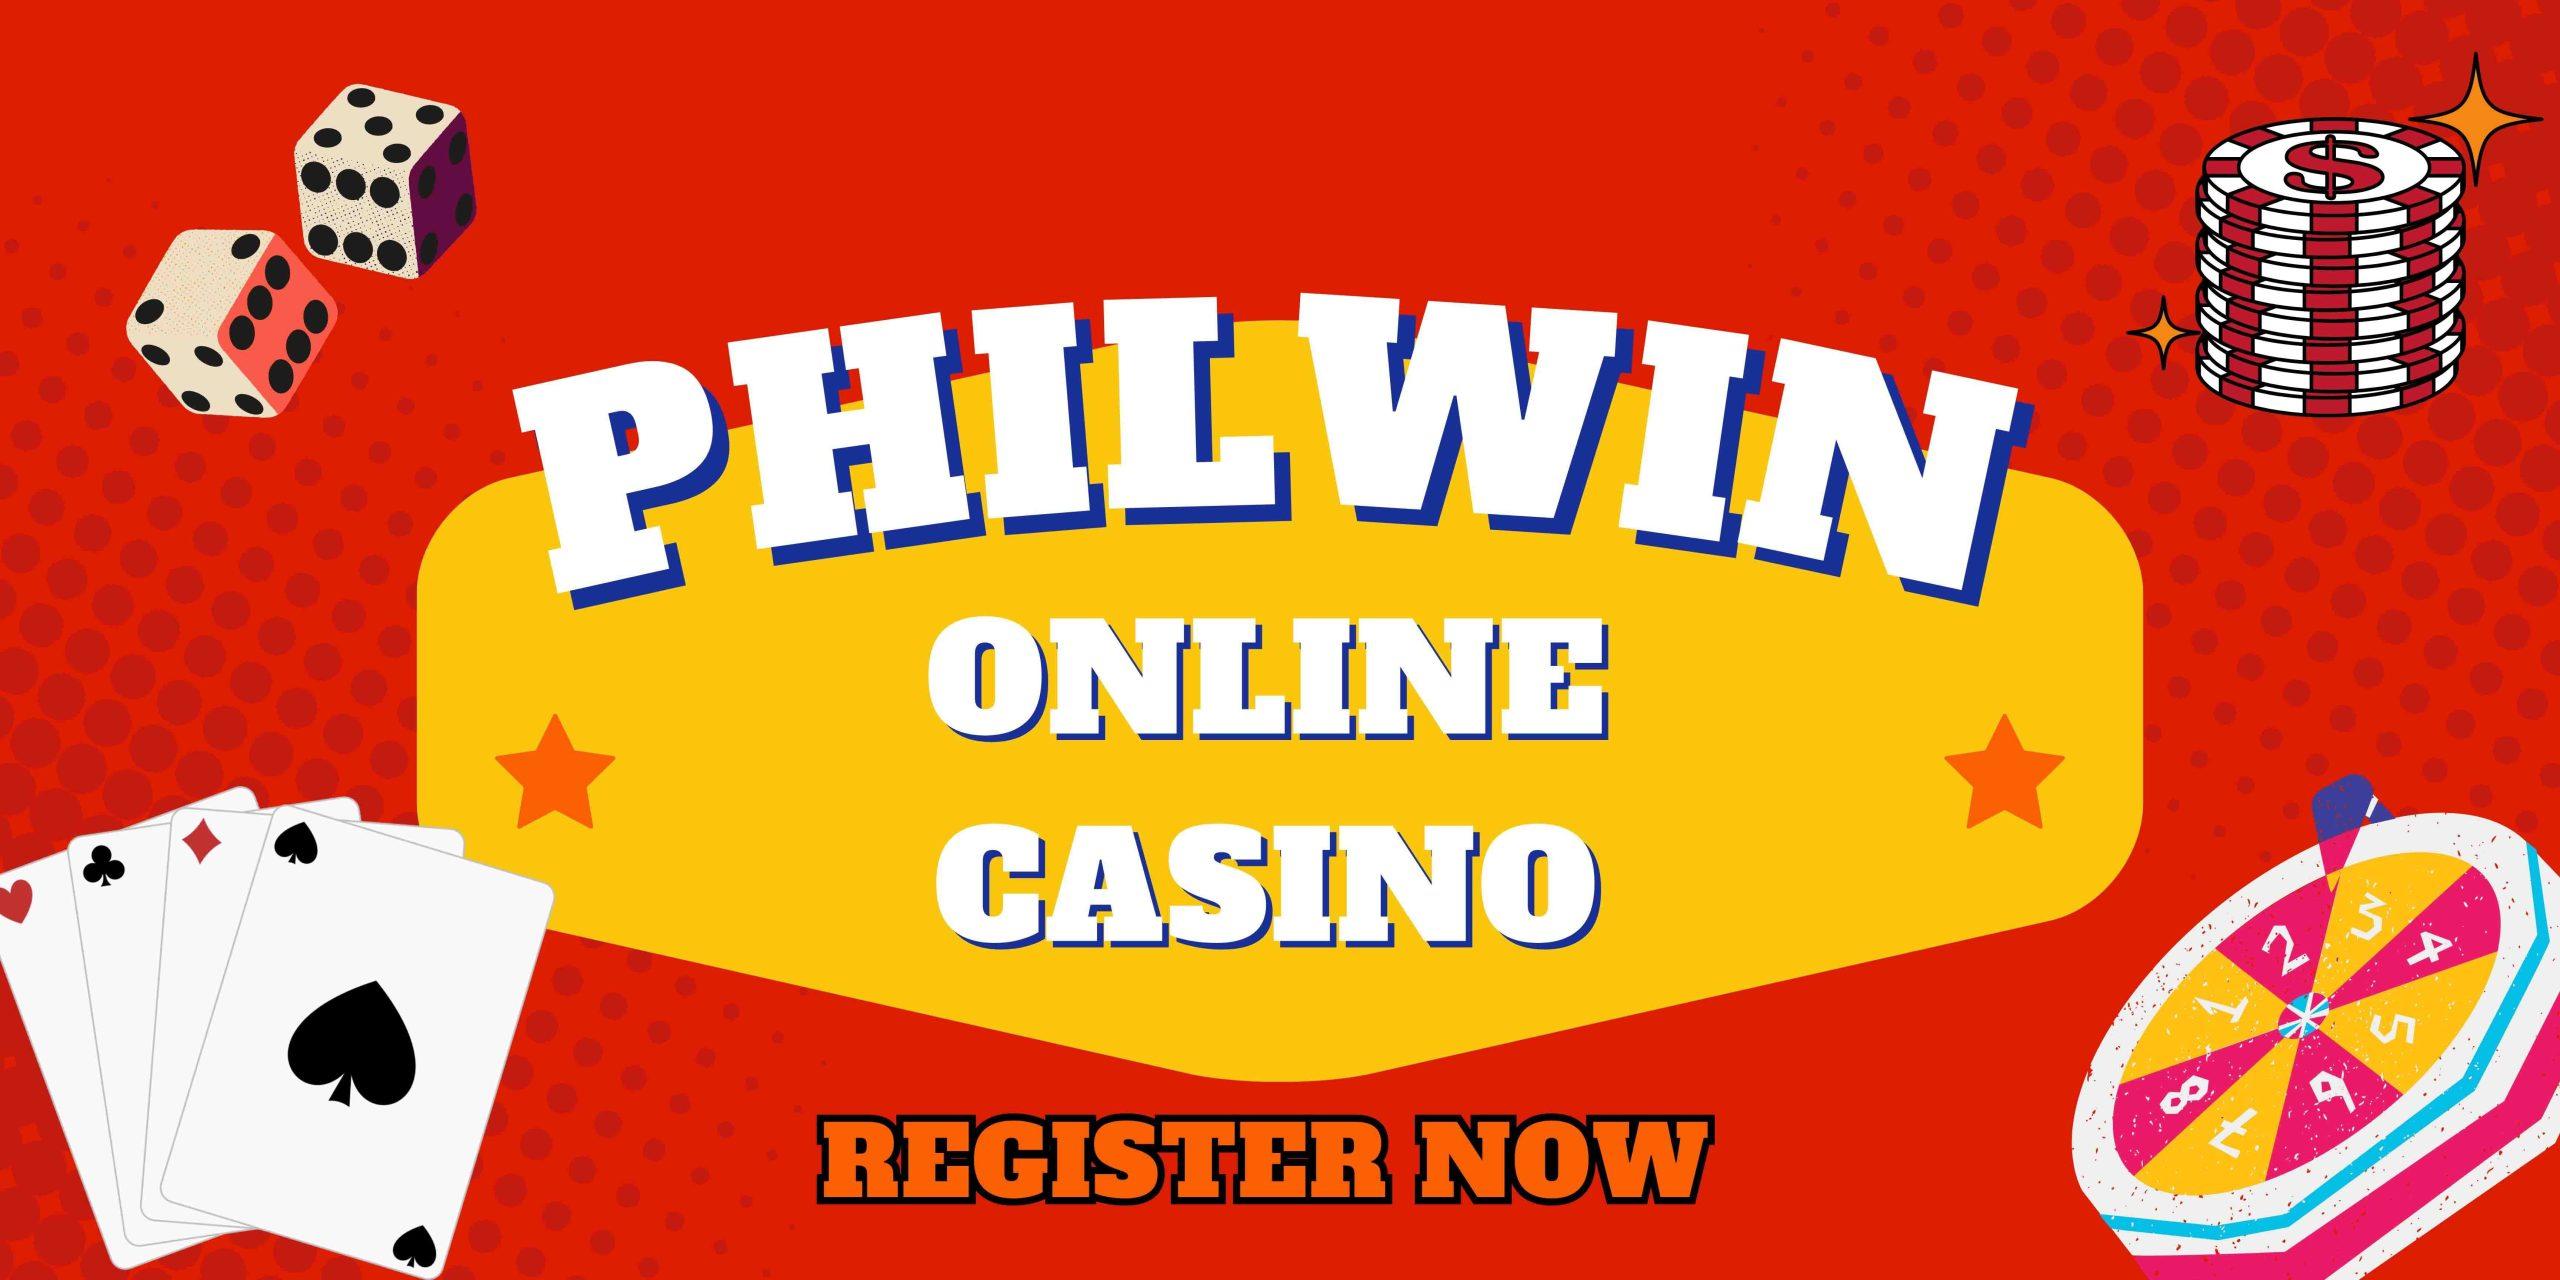 Philwin Online Casino #1 Join Now and Immerse Yourself